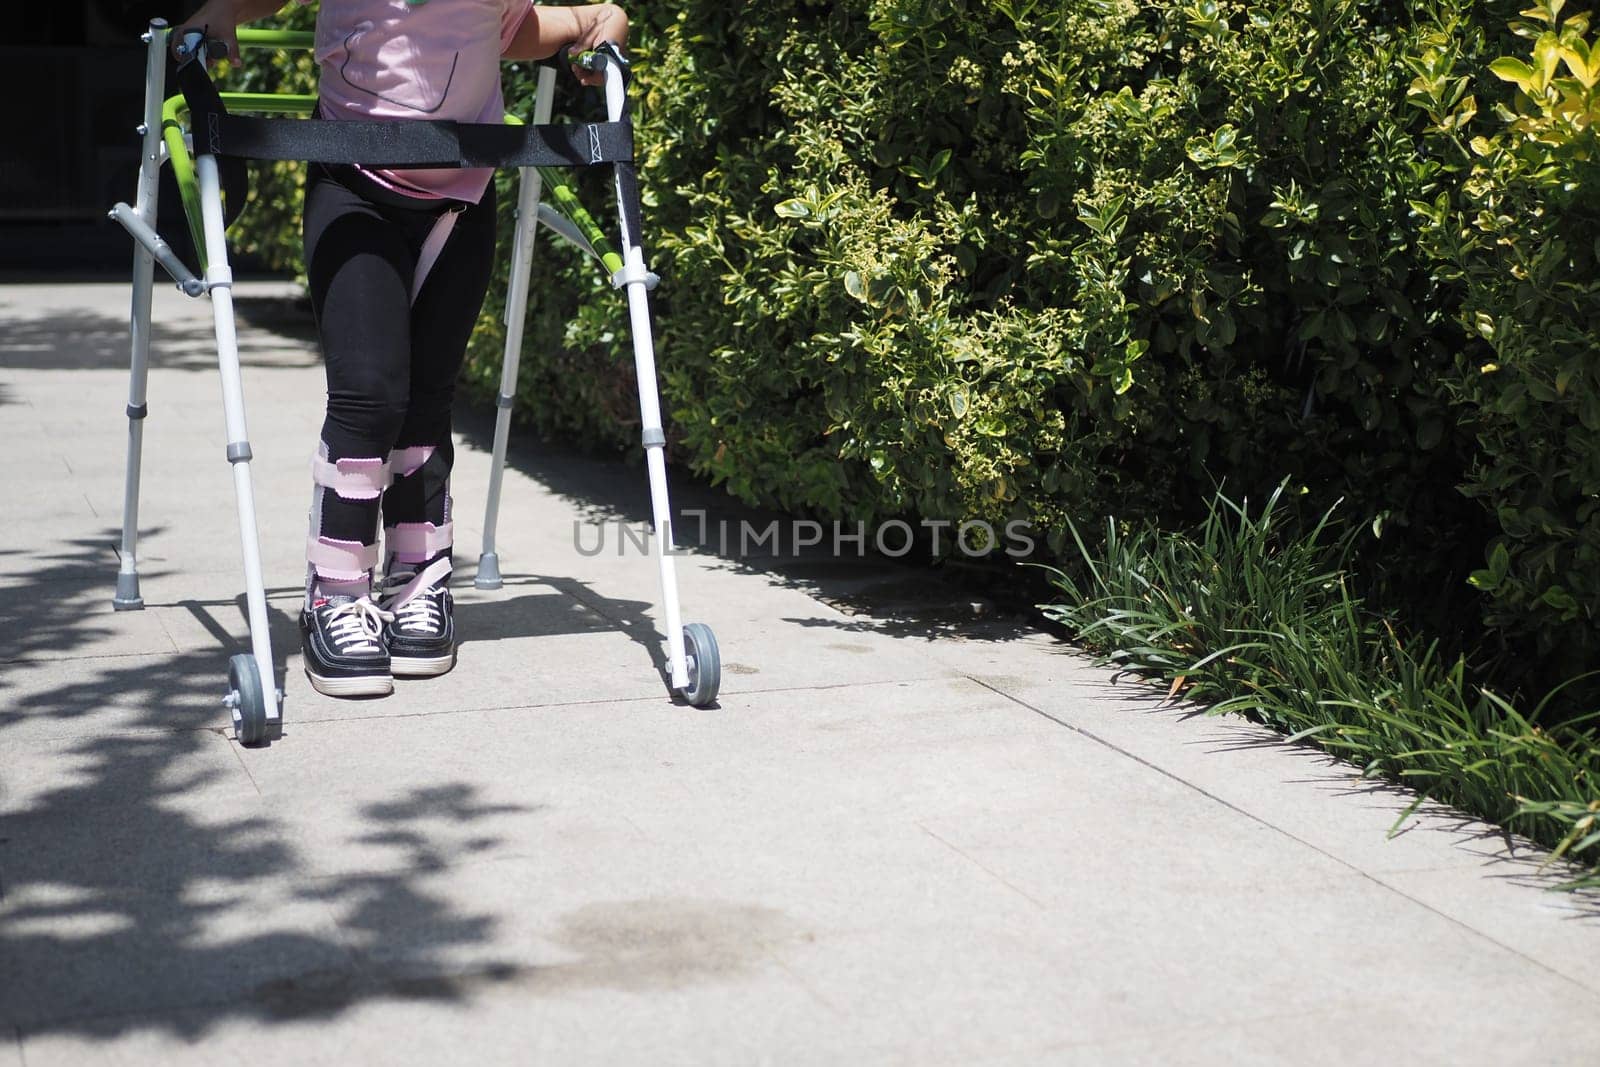 child with walking frame and knee orthosis outdoor by towfiq007